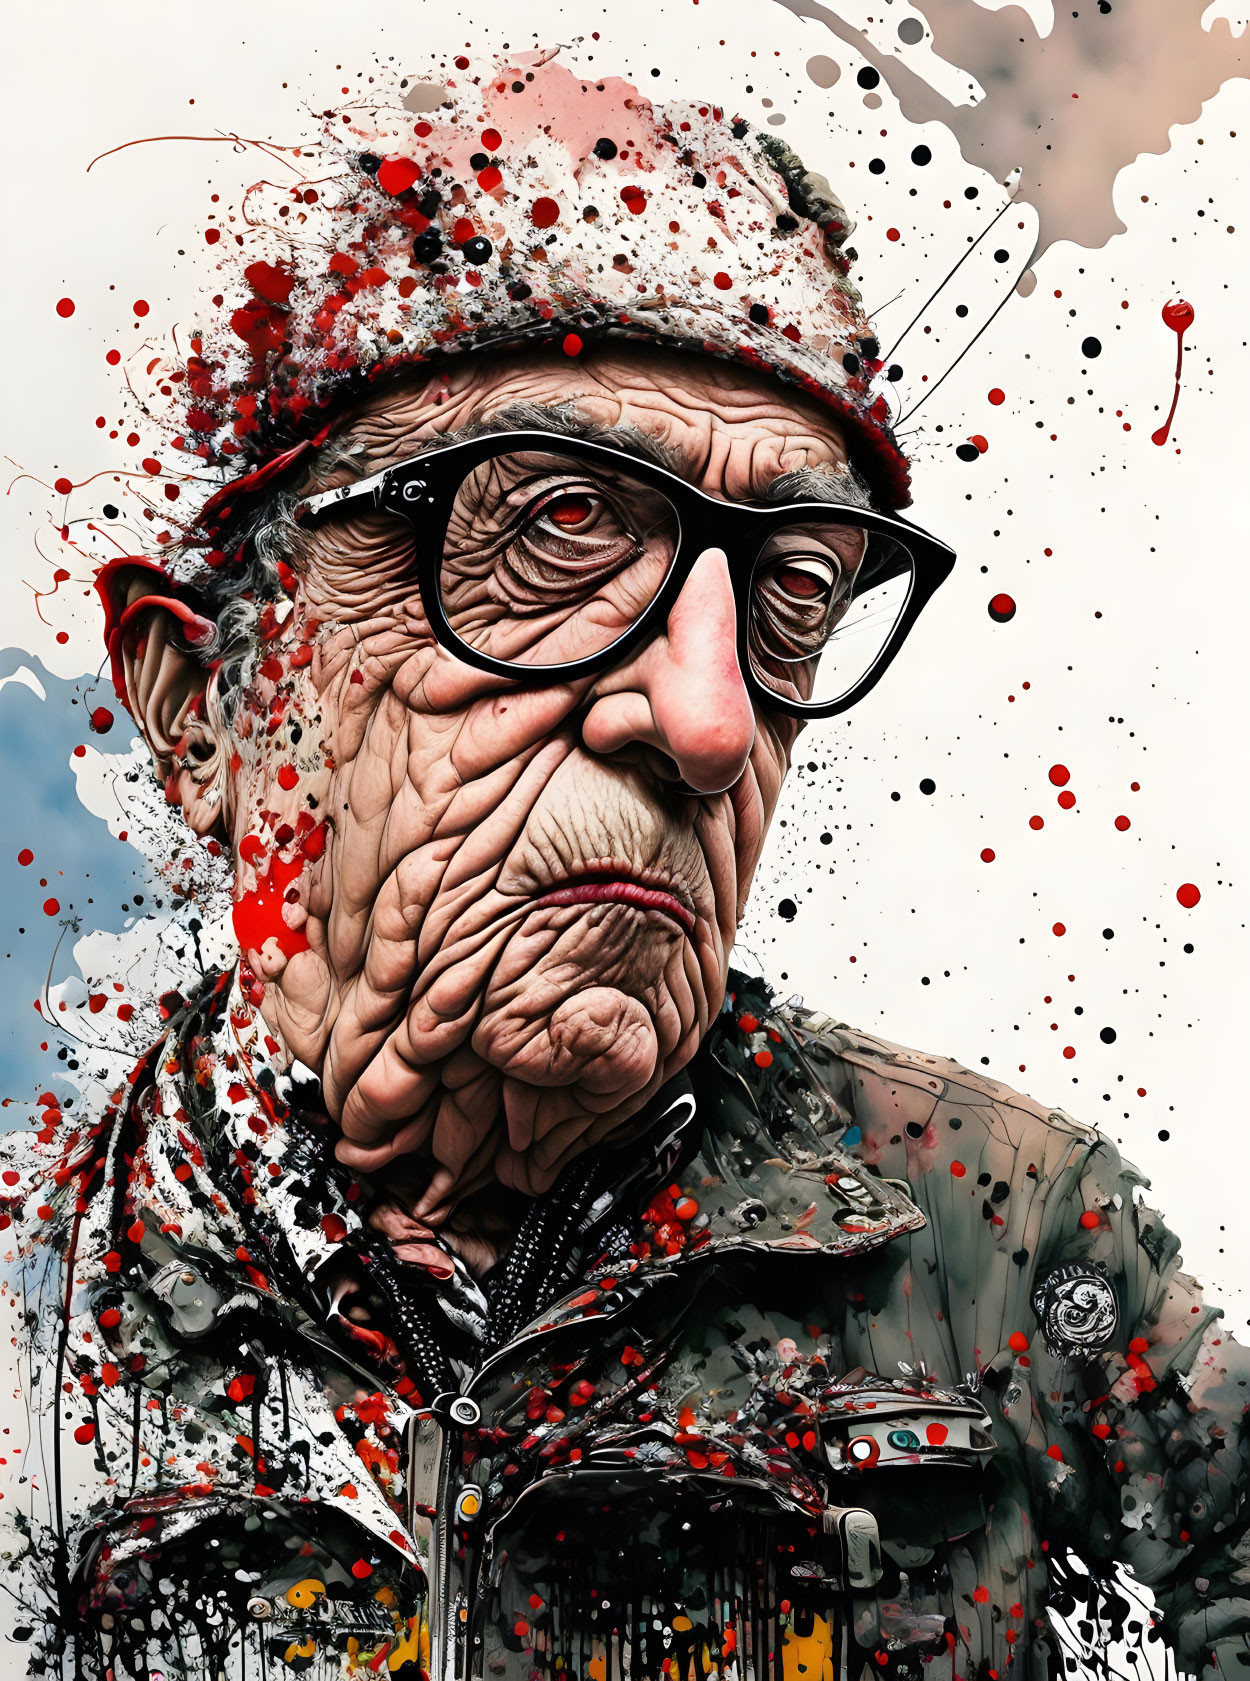 Elderly man with glasses and cap, stern expression, red and black splatters on light background